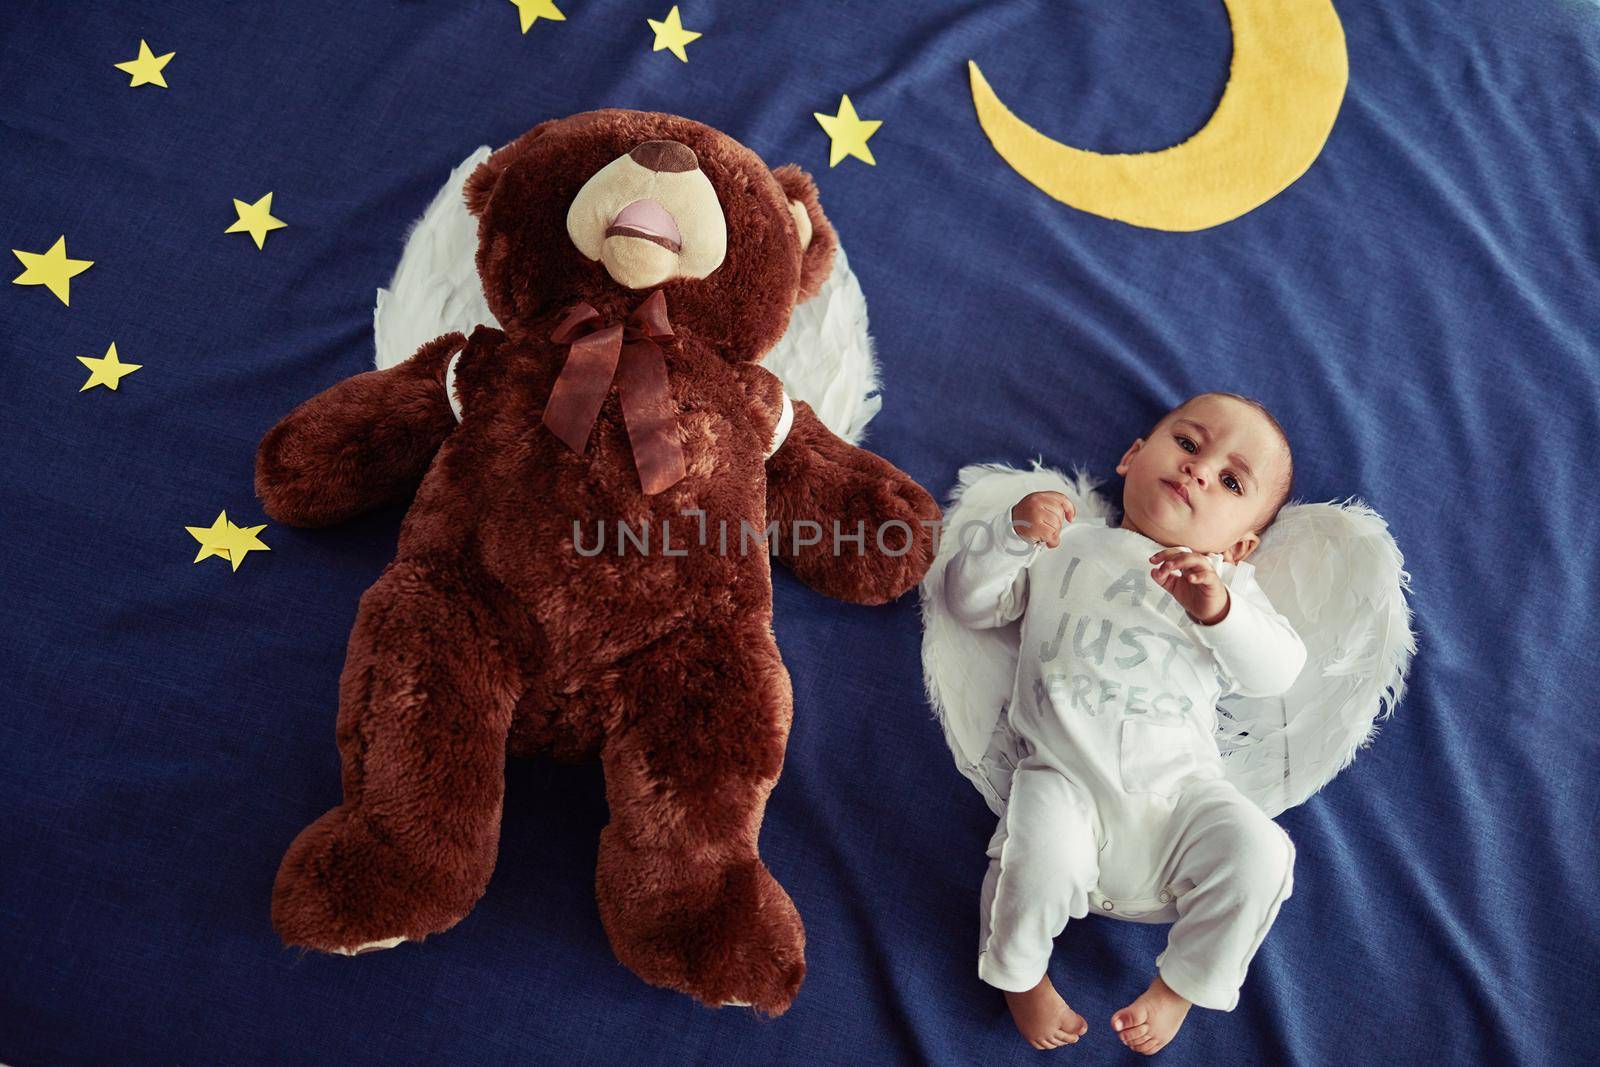 Babies are angels sent from heaven. Concept shot of an adorable baby boy and a teddy bear wearing angel wings against an imaginary night time background. by YuriArcurs